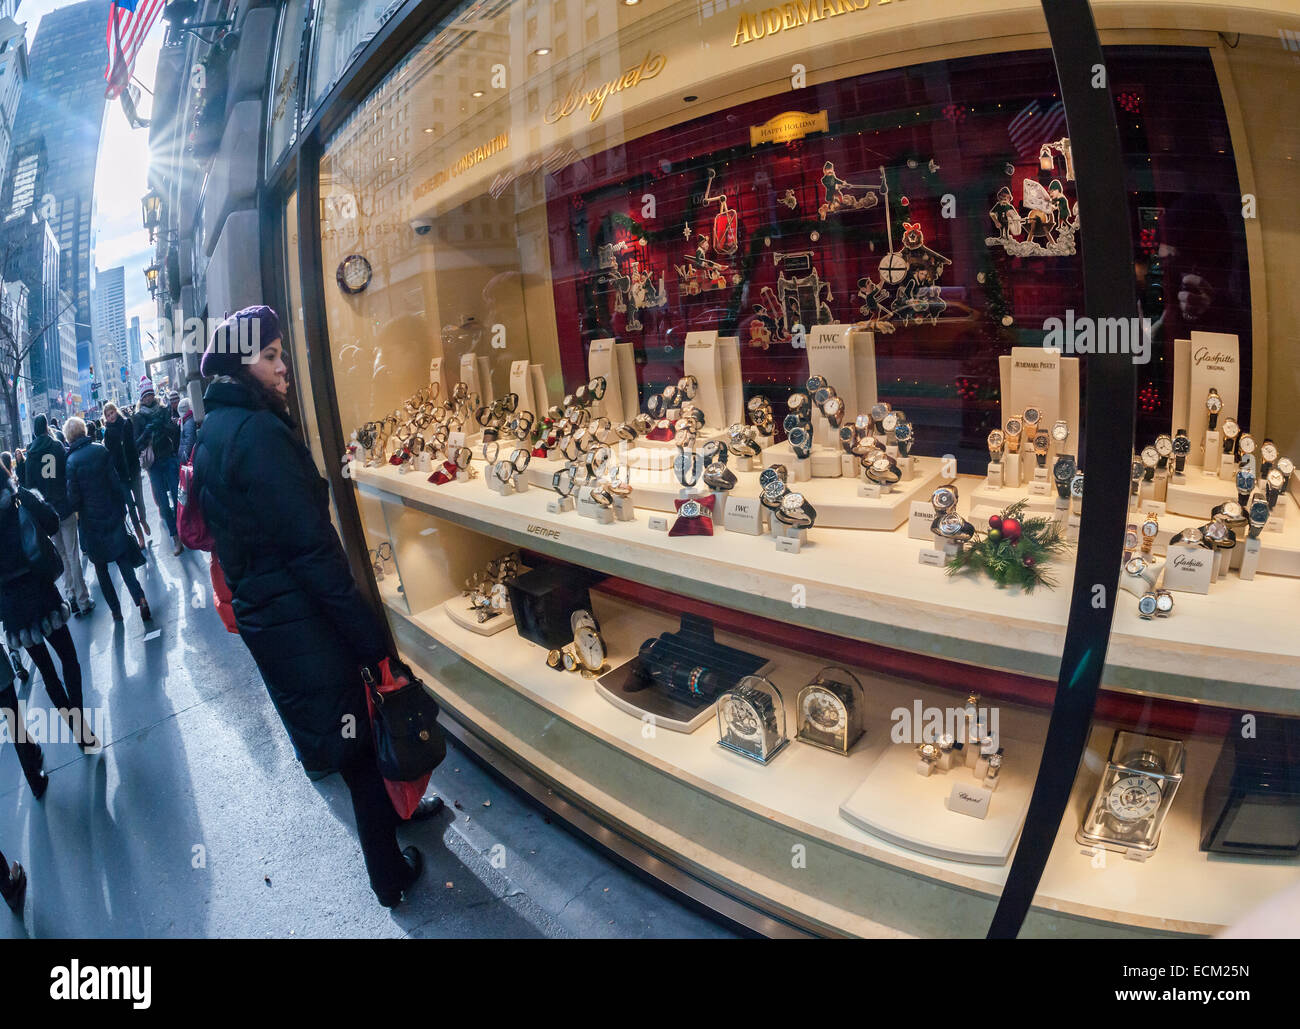 A display of luxury watches is seen in the window of a store in New York on Sunday, December 14, 2014. A recent study on conspicuous consumption reported that New Yorkers spend 597 percent more on watches than the rest of the country. (© Richard B. Levine) Stock Photo